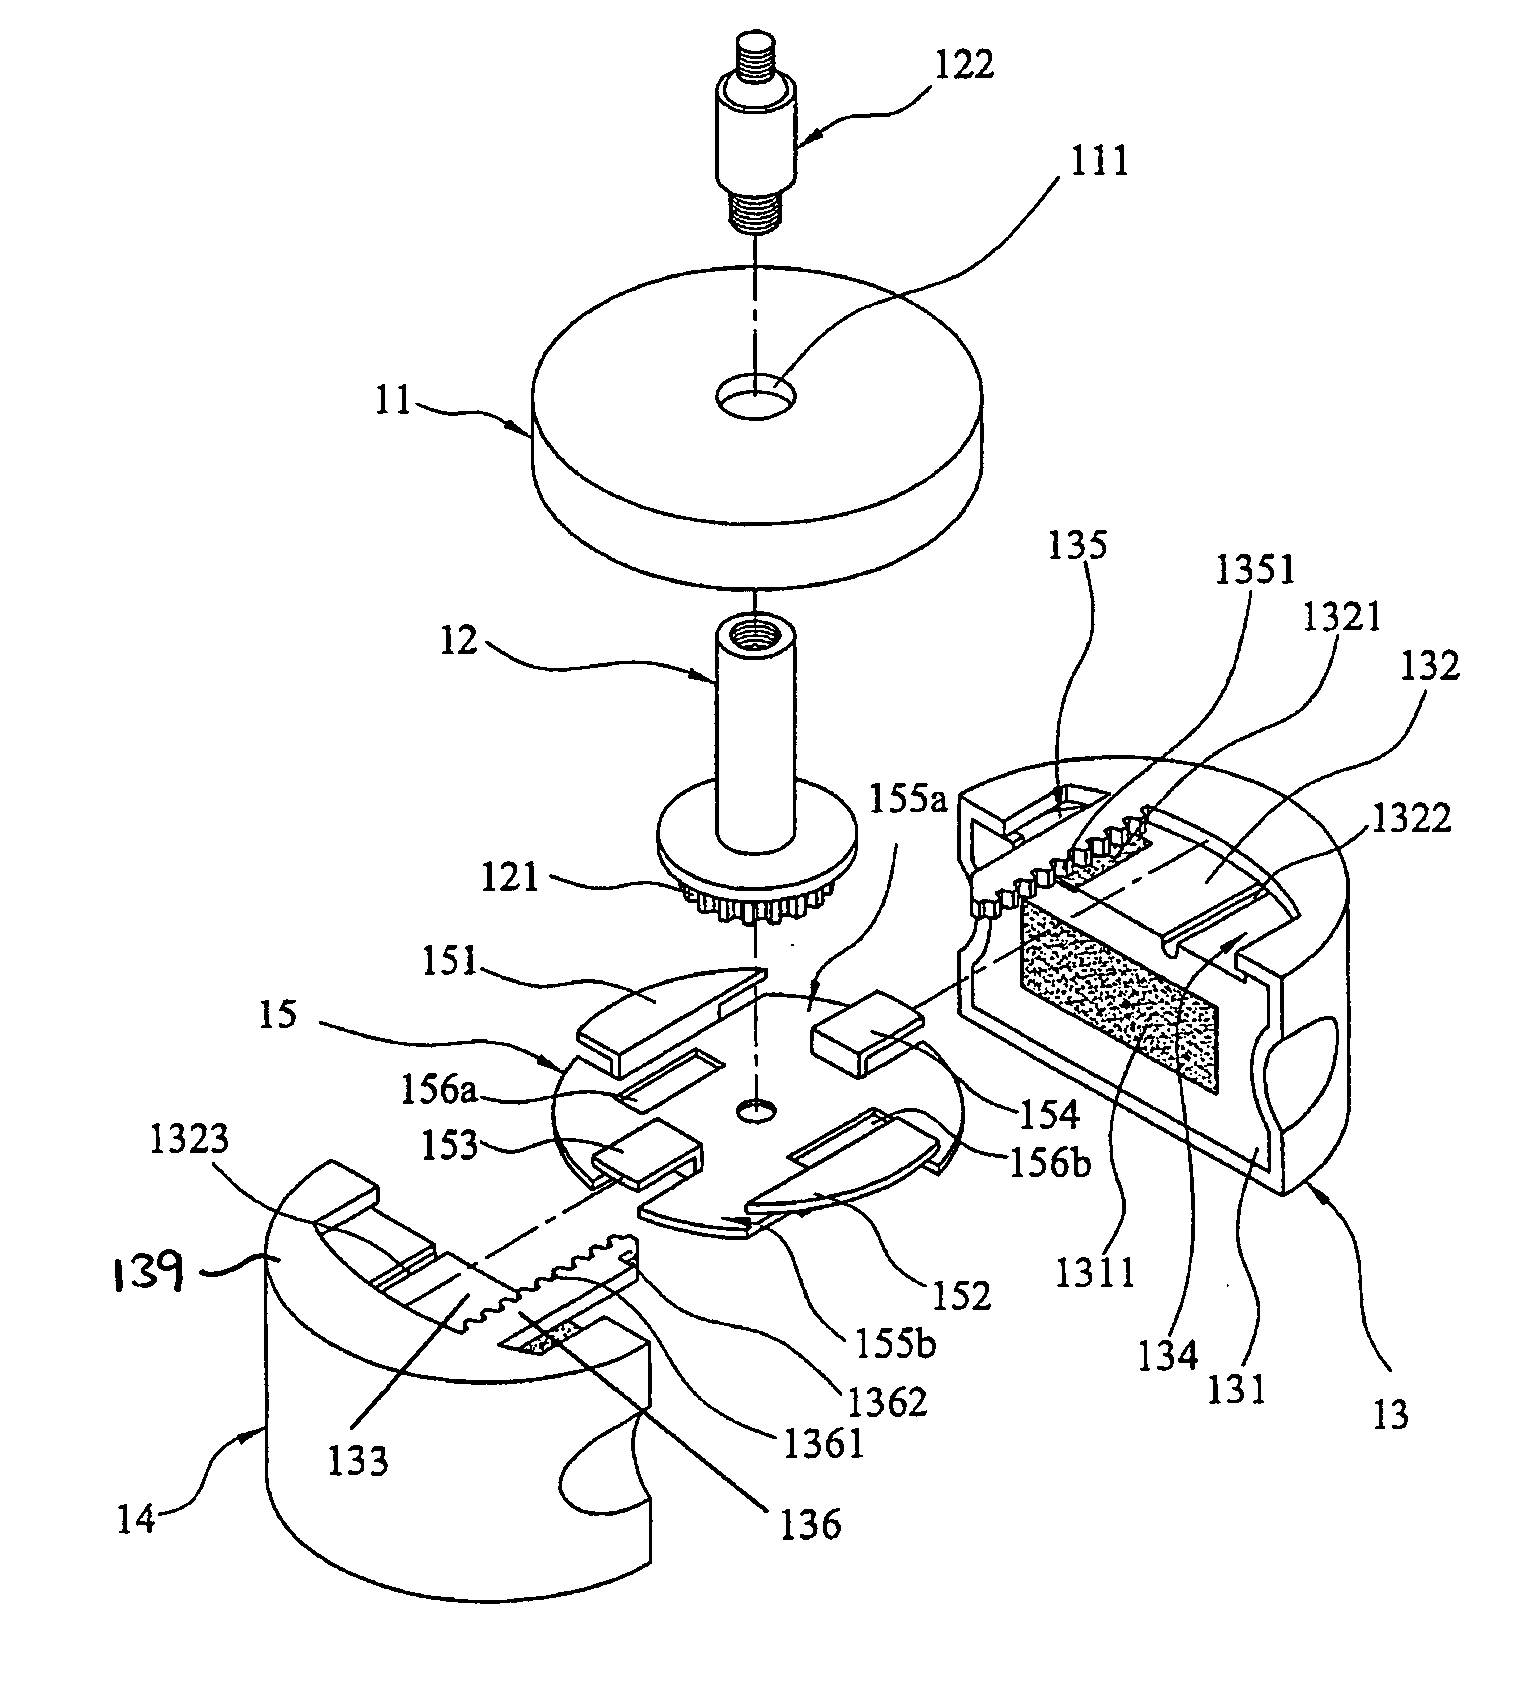 Support for a computer peripheral device